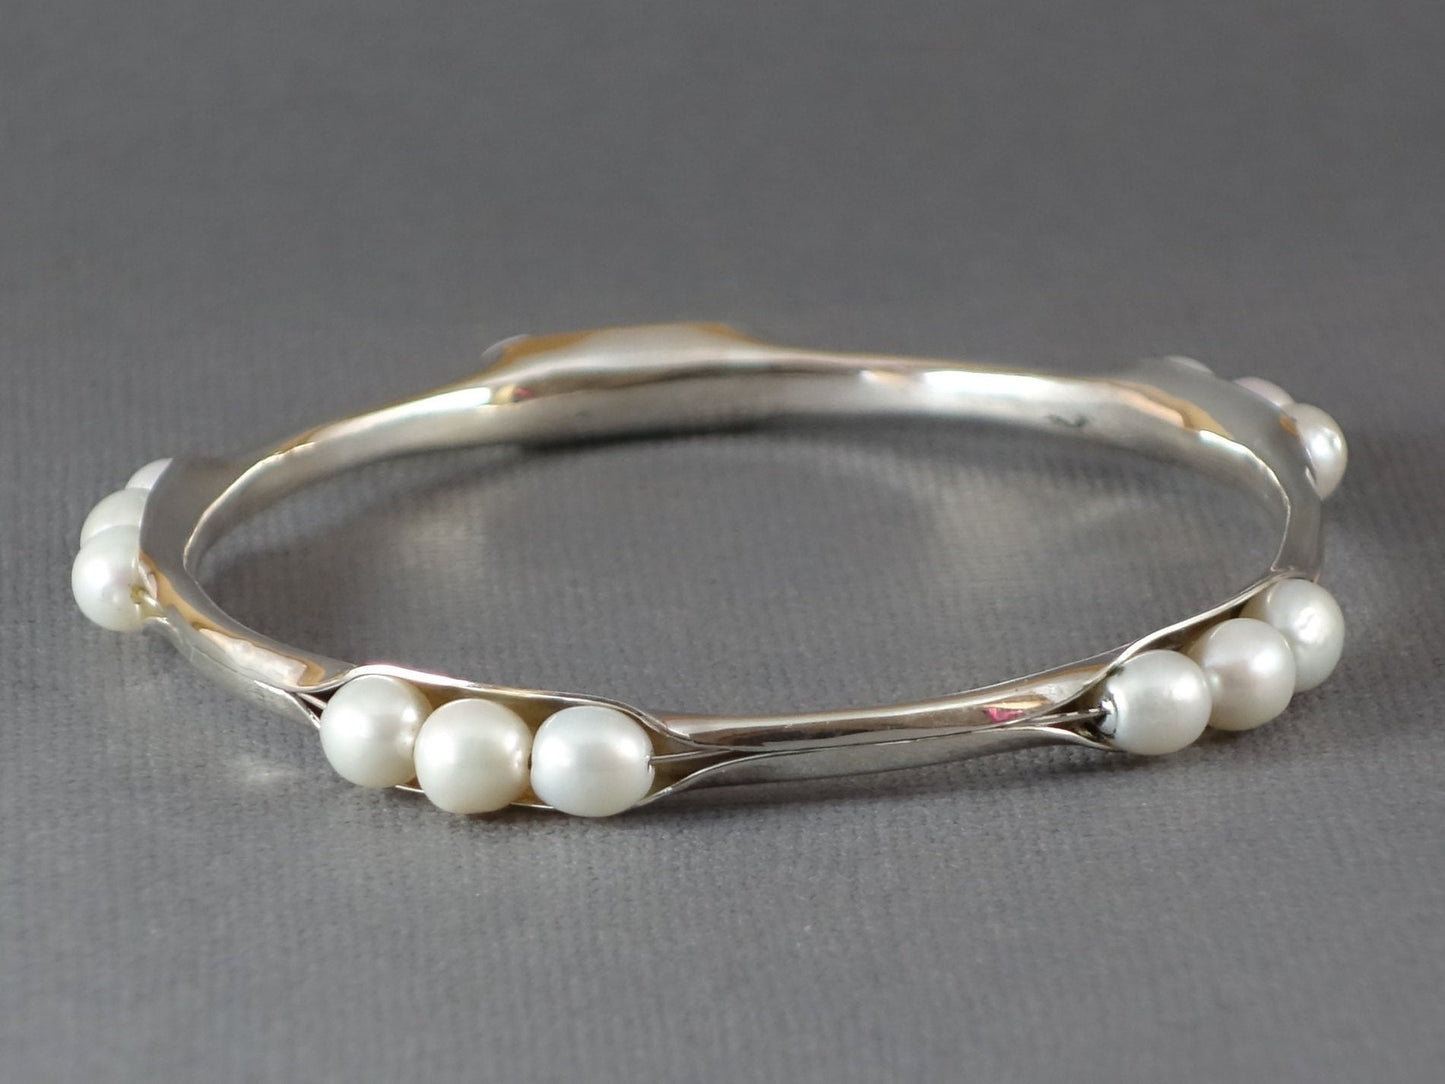 Anticlastic Bangle with White Pearls, Silver Bangle, 5 station